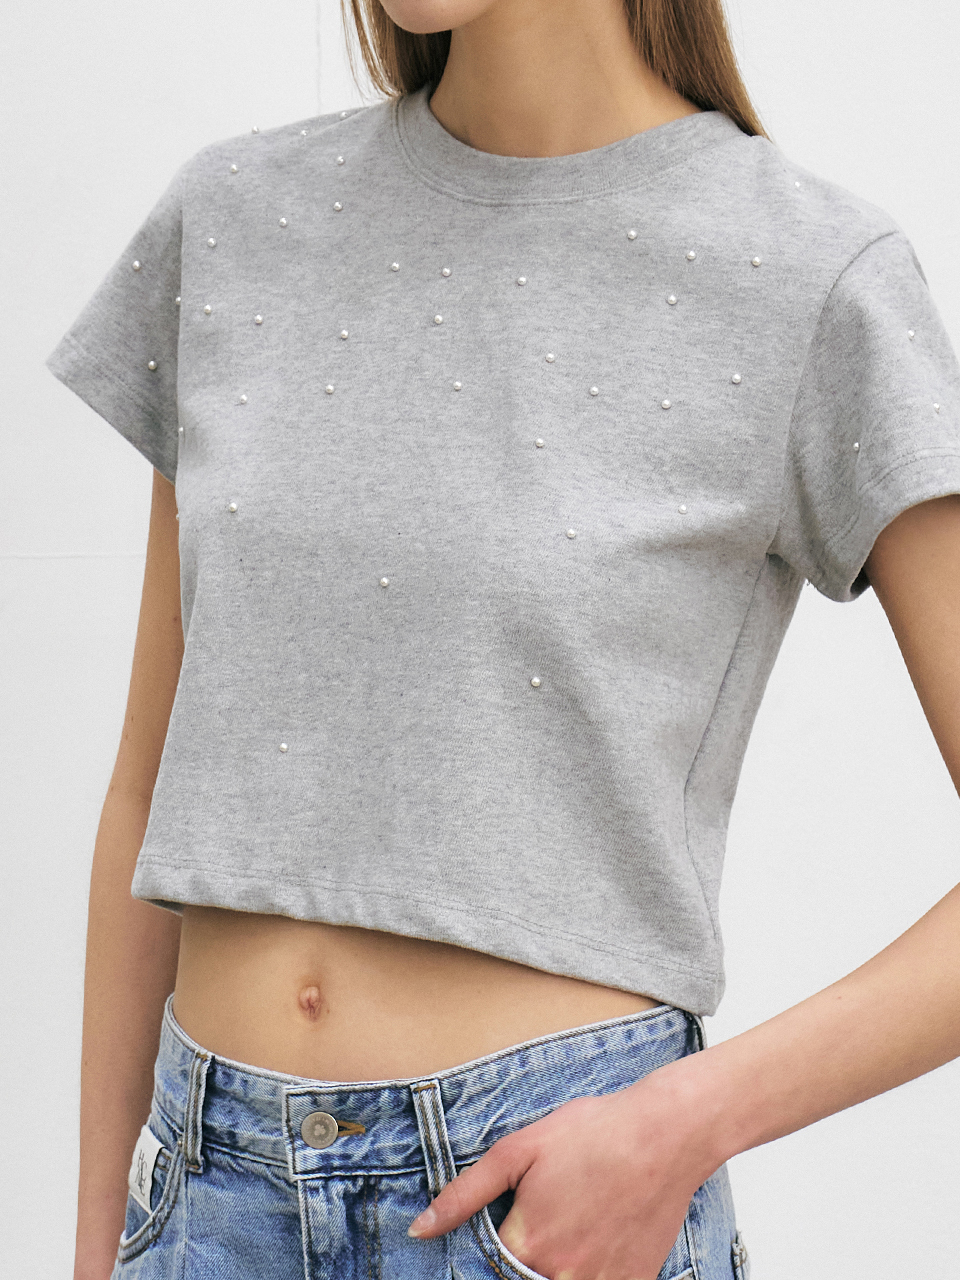 HACIE - PEARL BEADS CROPPED T-SHIRT [3COLORS]